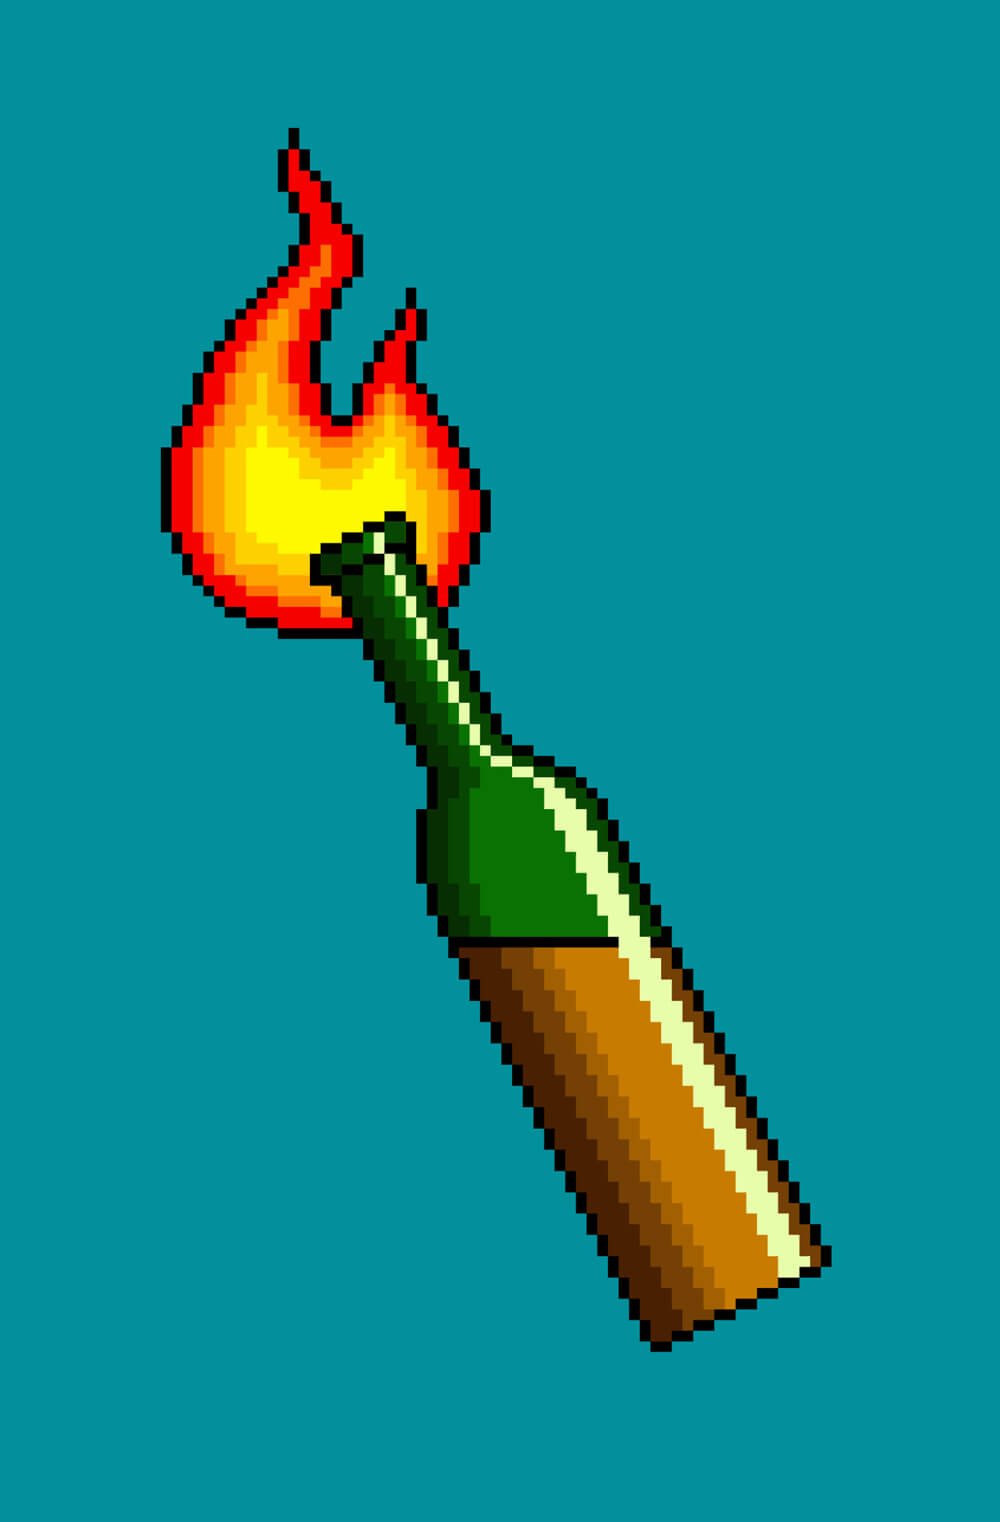 An 8-bit-style illustration of a molotov cocktail.